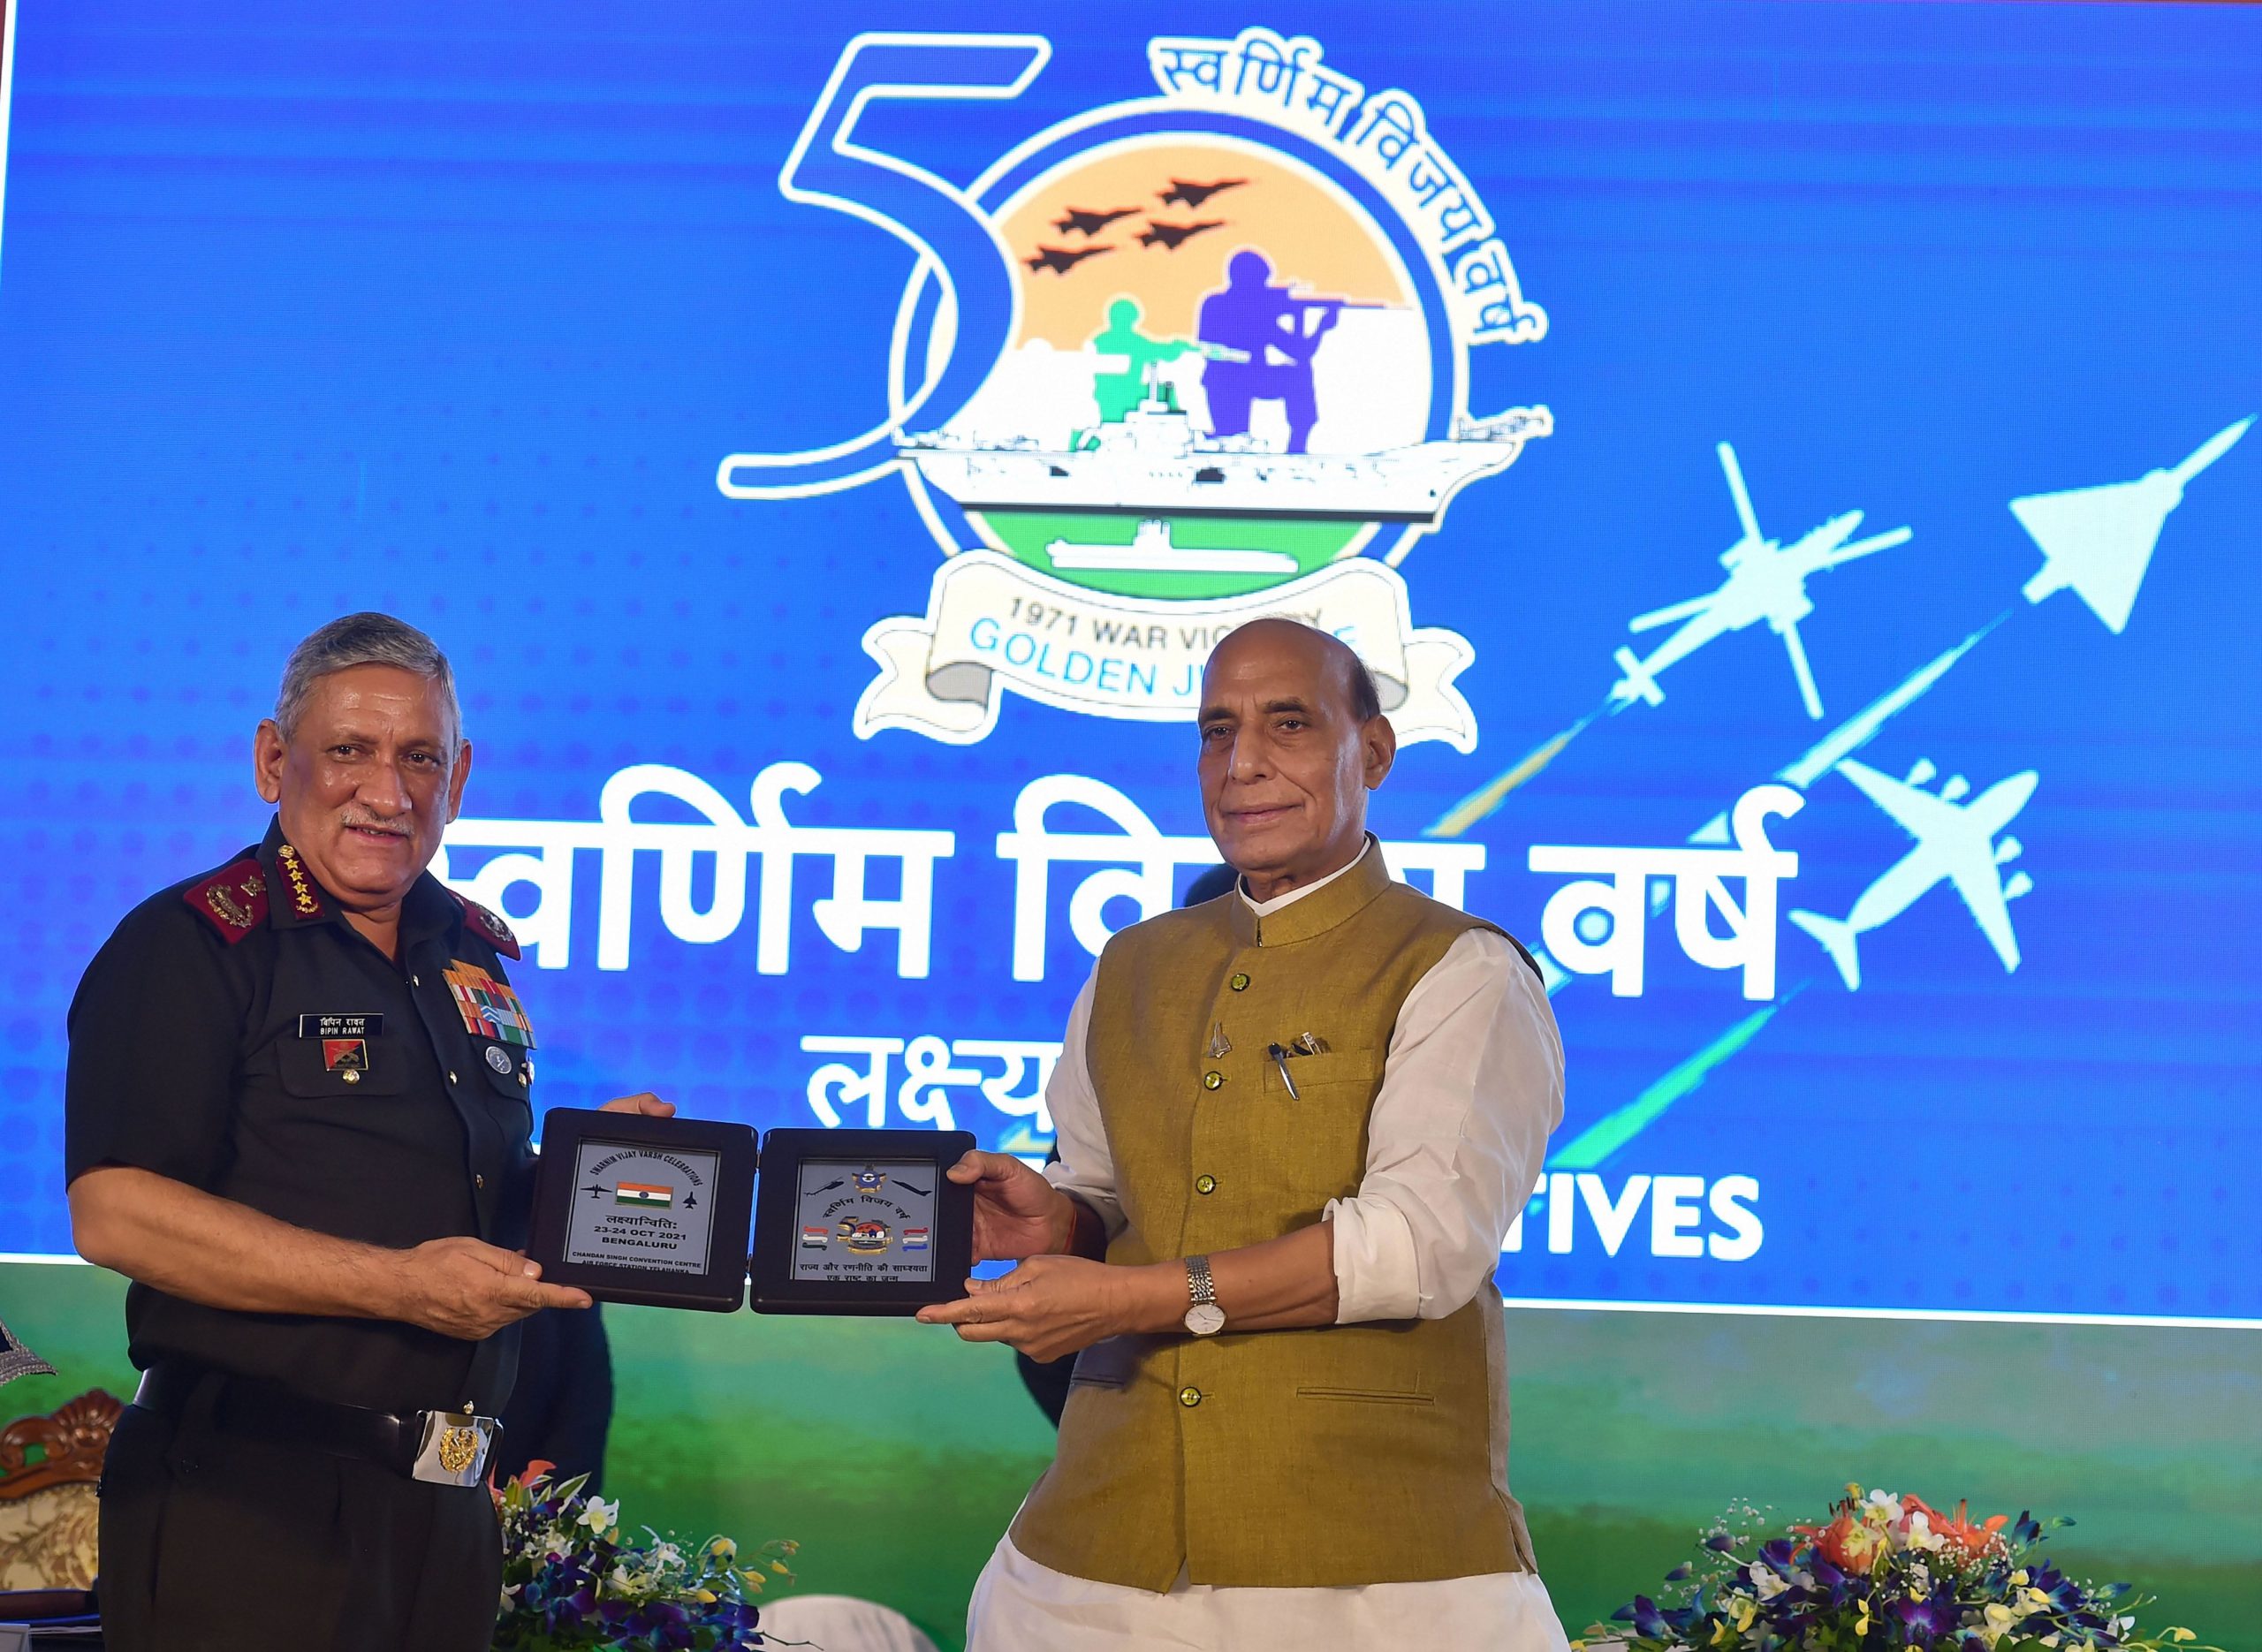 List of Chief of Defence Staff General Bipin Rawat’s honours and awards